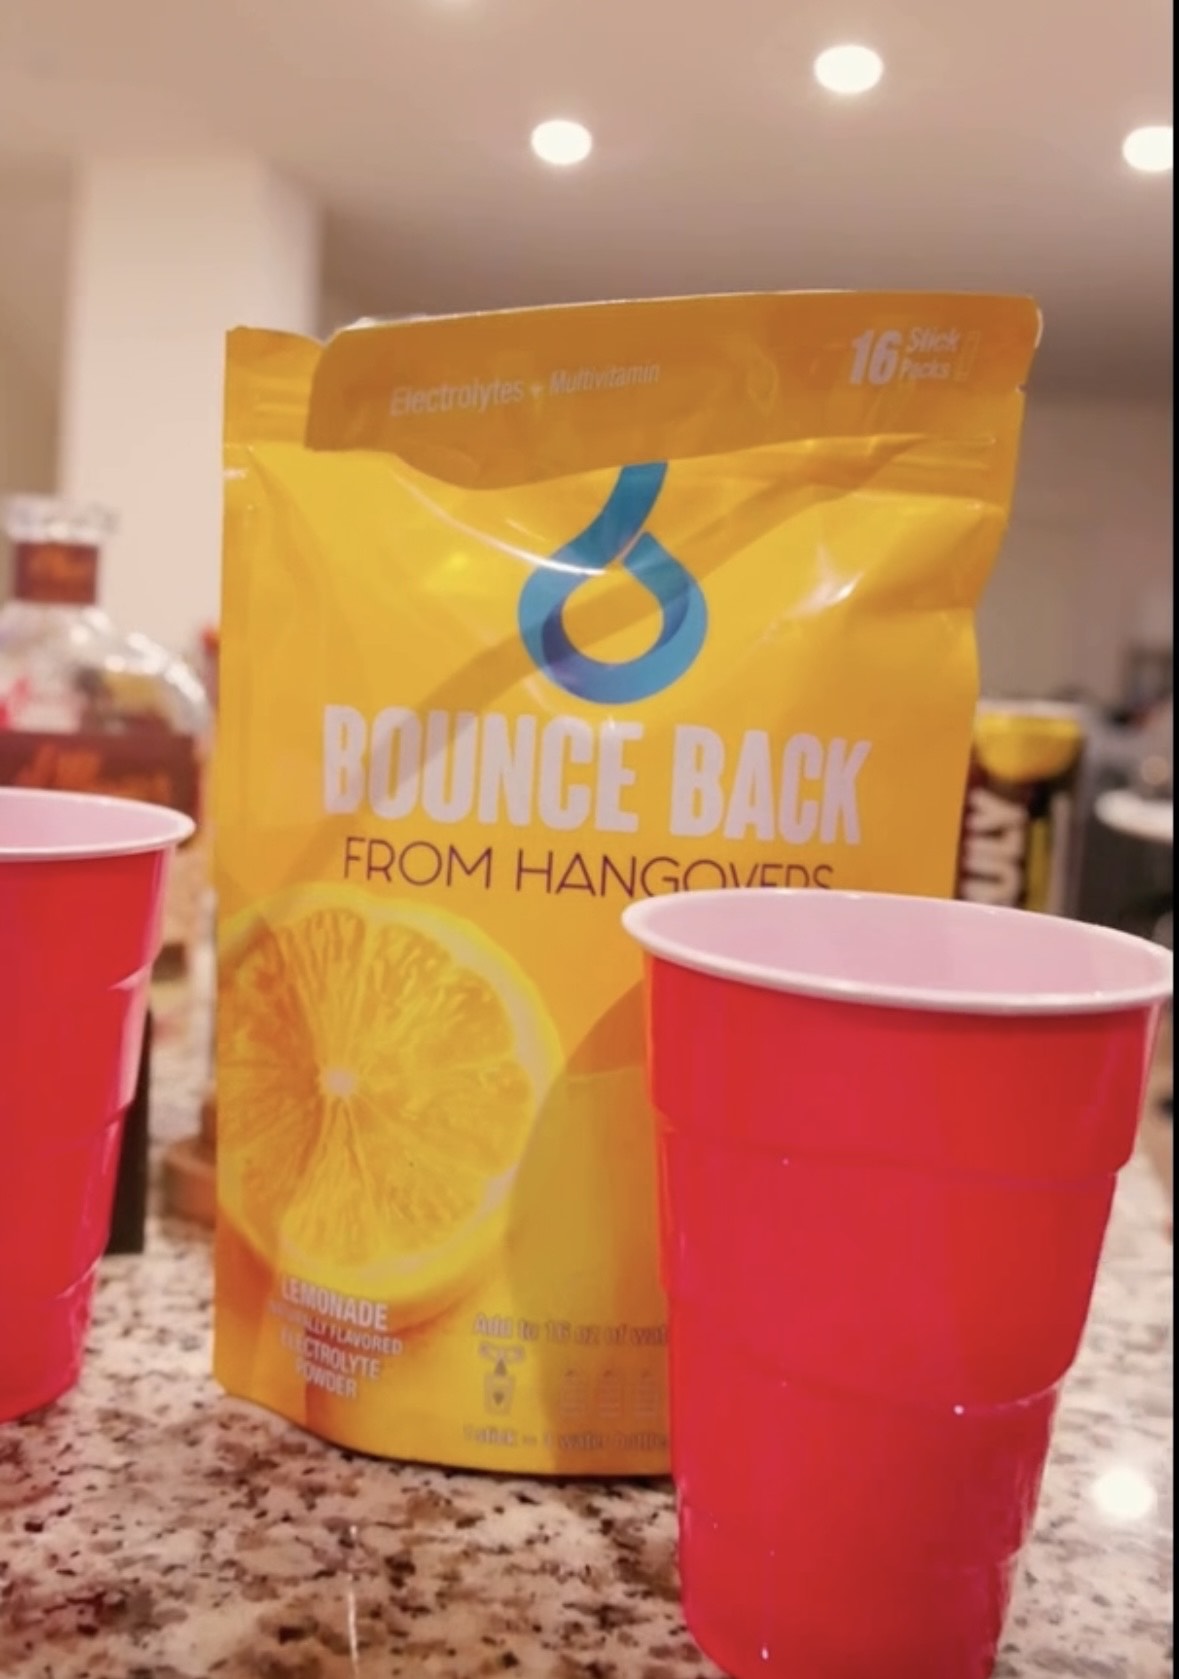 Party Pack Rehydration Bundle with Bounce Back (Lemonade) - Shots No Chaser